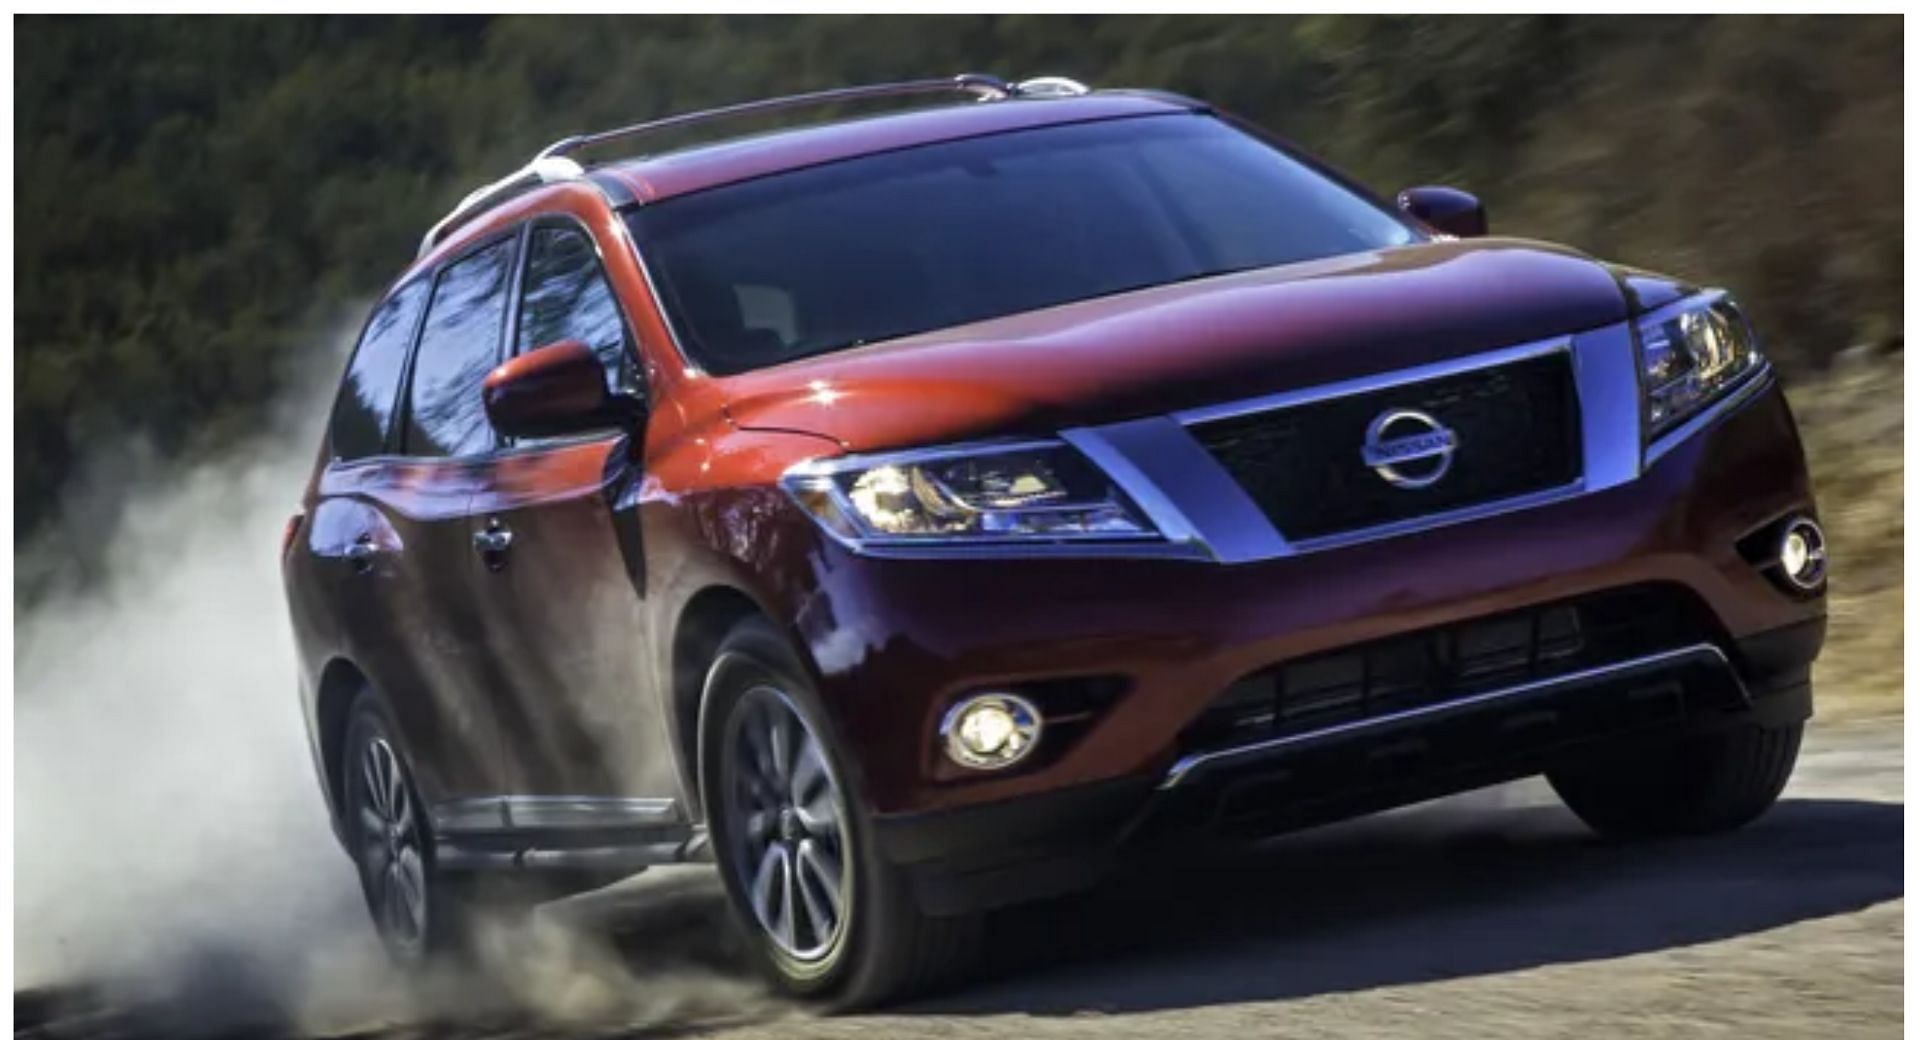 Nissan Pathfinder recall 2022 Model years, solution and everything to